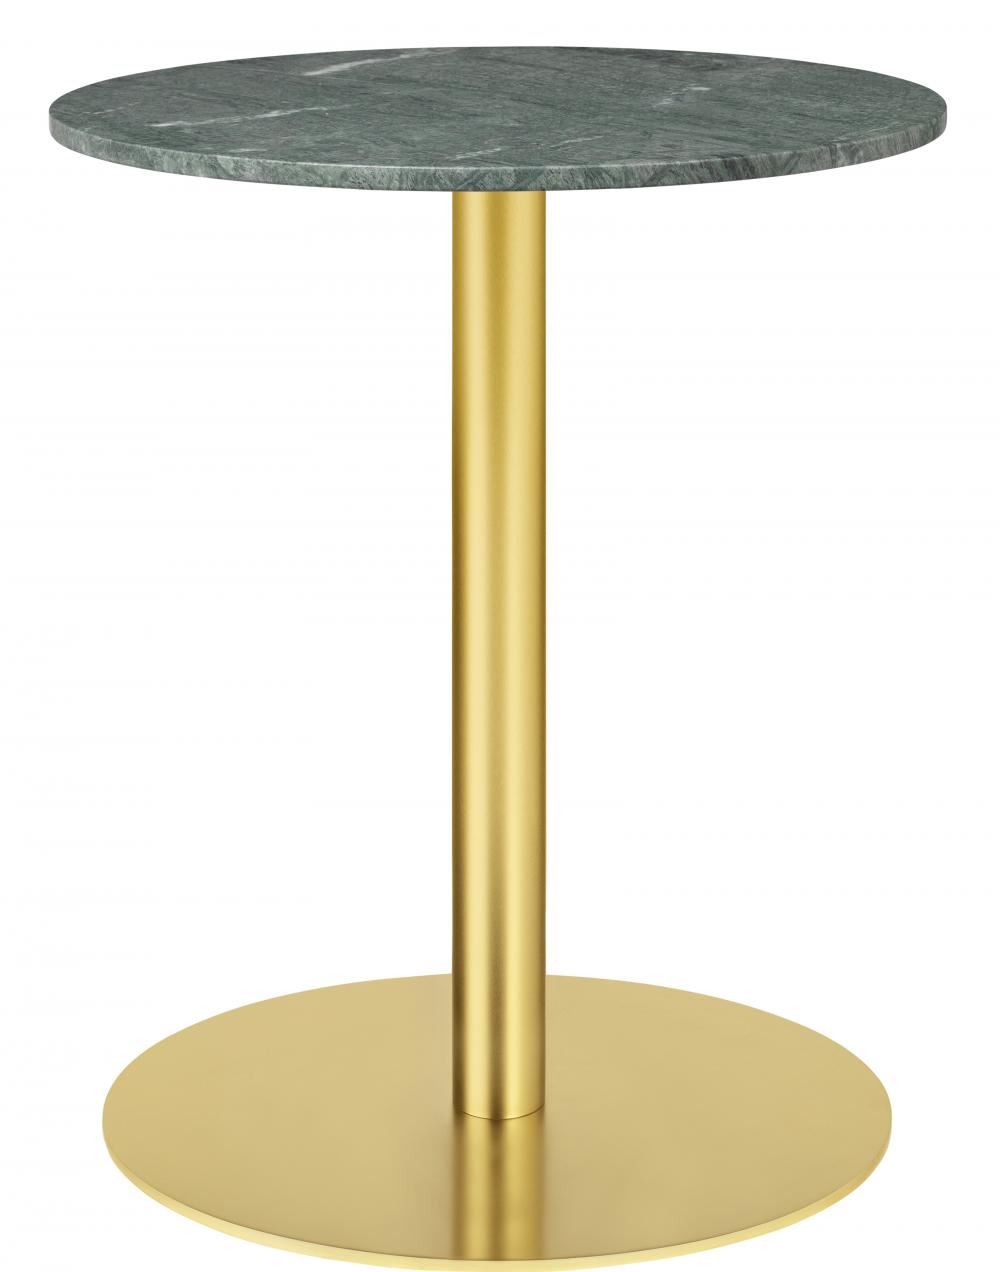 Gubi 10 Table Round Marble 60 Brass Basedining Table Green